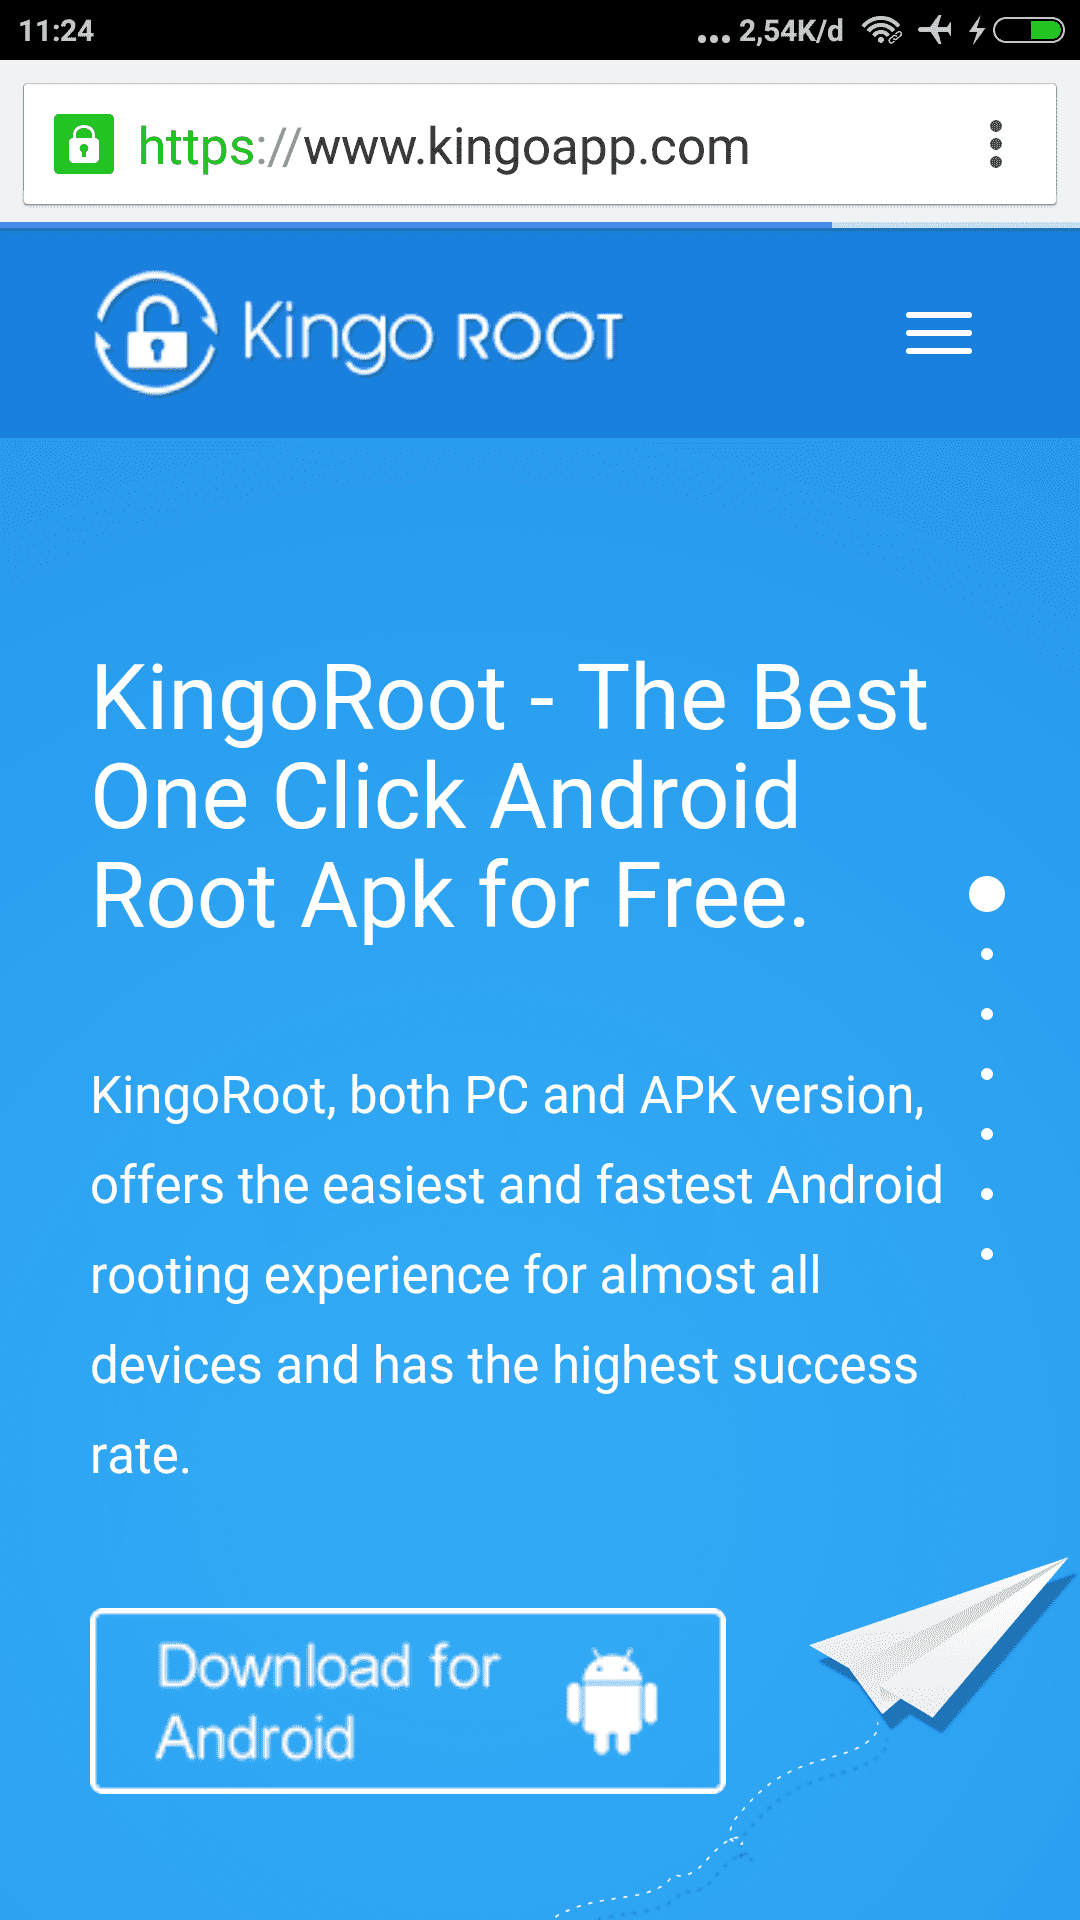 Easily Root LG G Pad 8.3 Without Computer 1